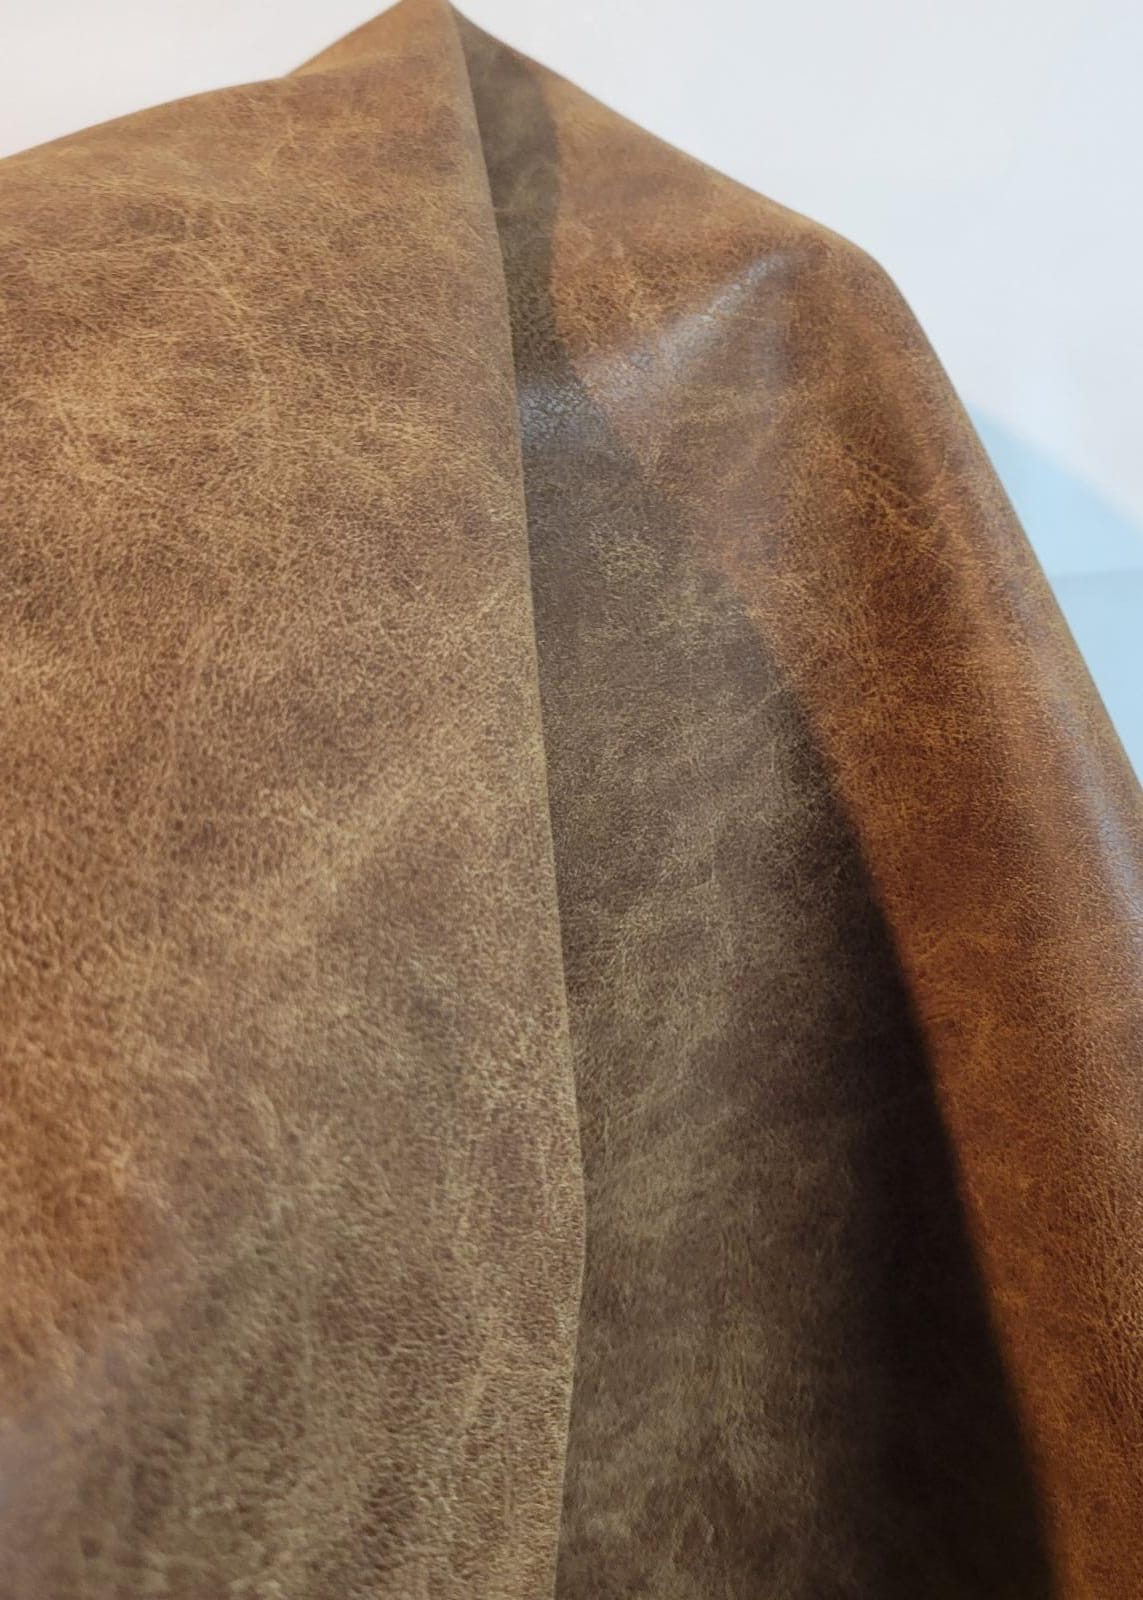  Faux vegan leather by the yard sheets distressed leather fabric for upholstery 30,000 Double Rubs vinyl sheets nappa leather crafts bookbinding books furniture fabrics uphilstery fuax material pu pleather faiux learher cruelty free nappa seat chestnut brown